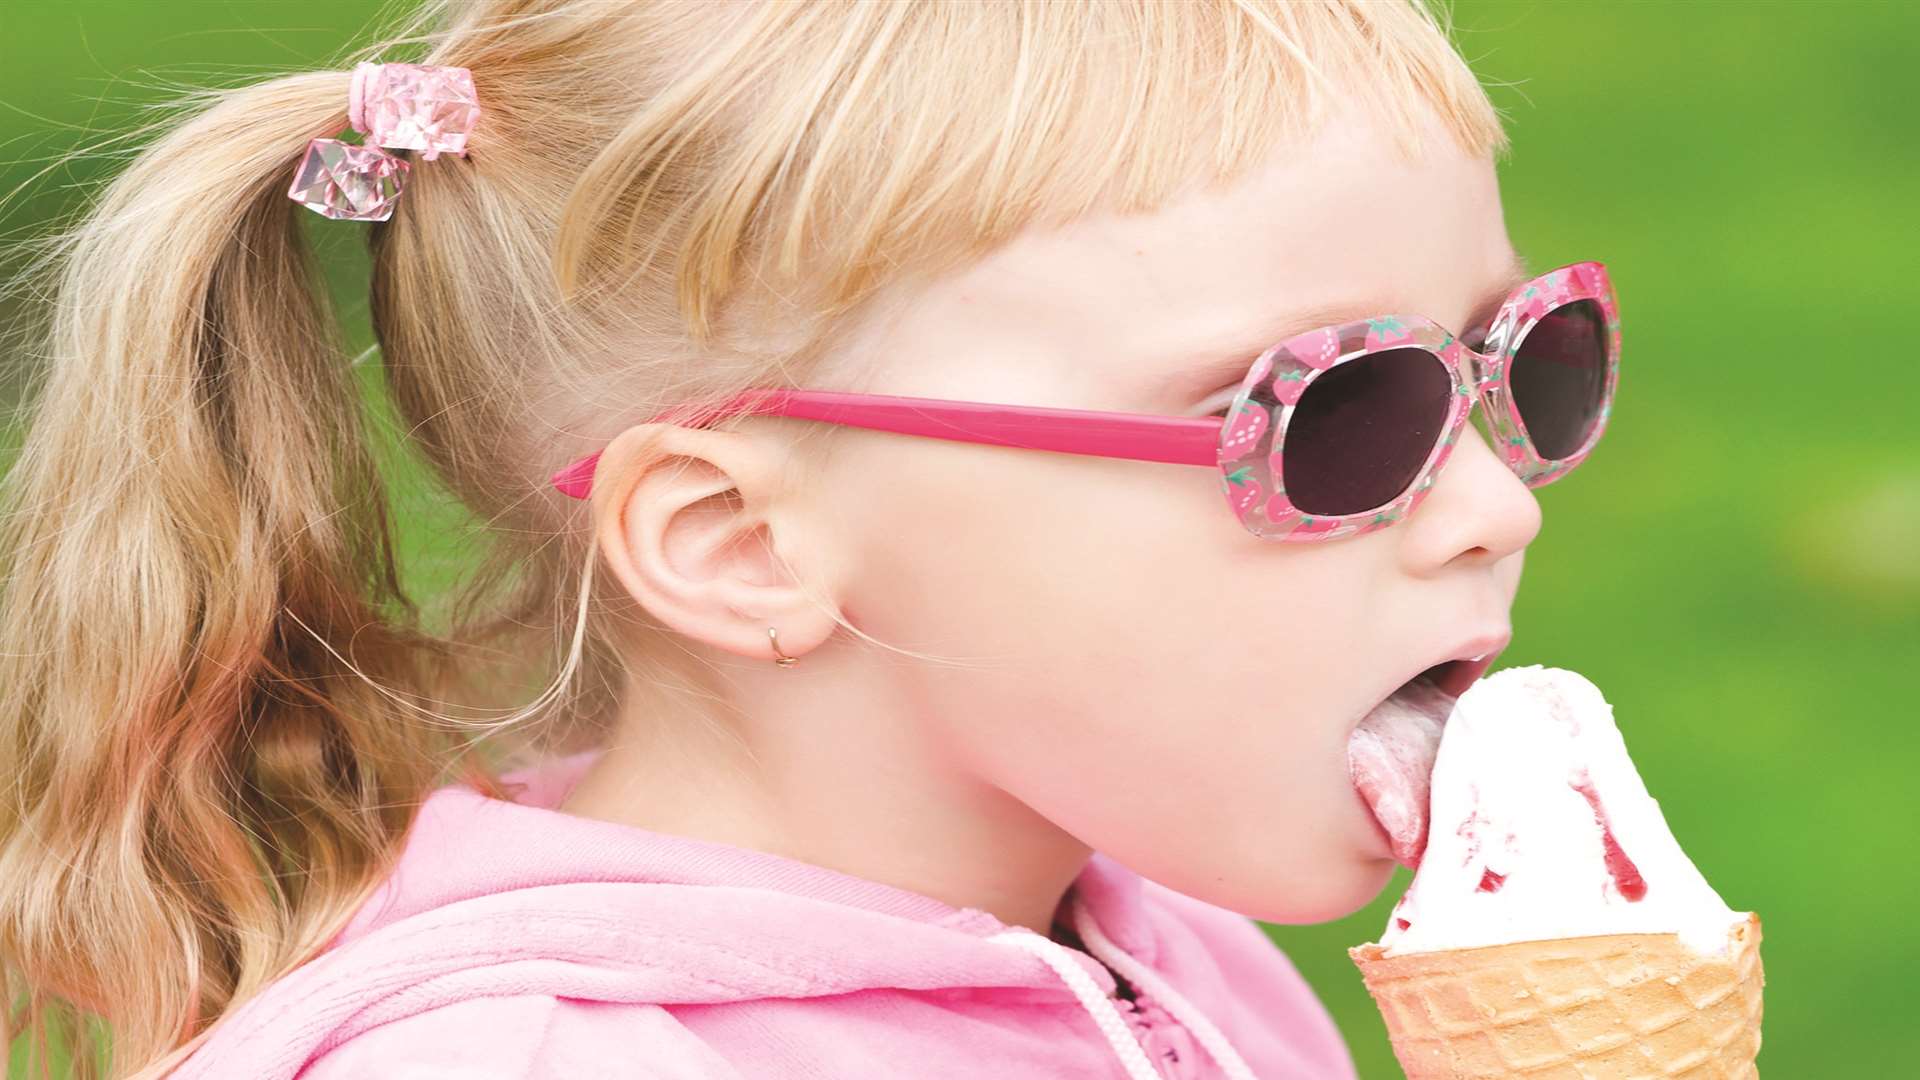 You could be enjoying an ice cream like this youngster